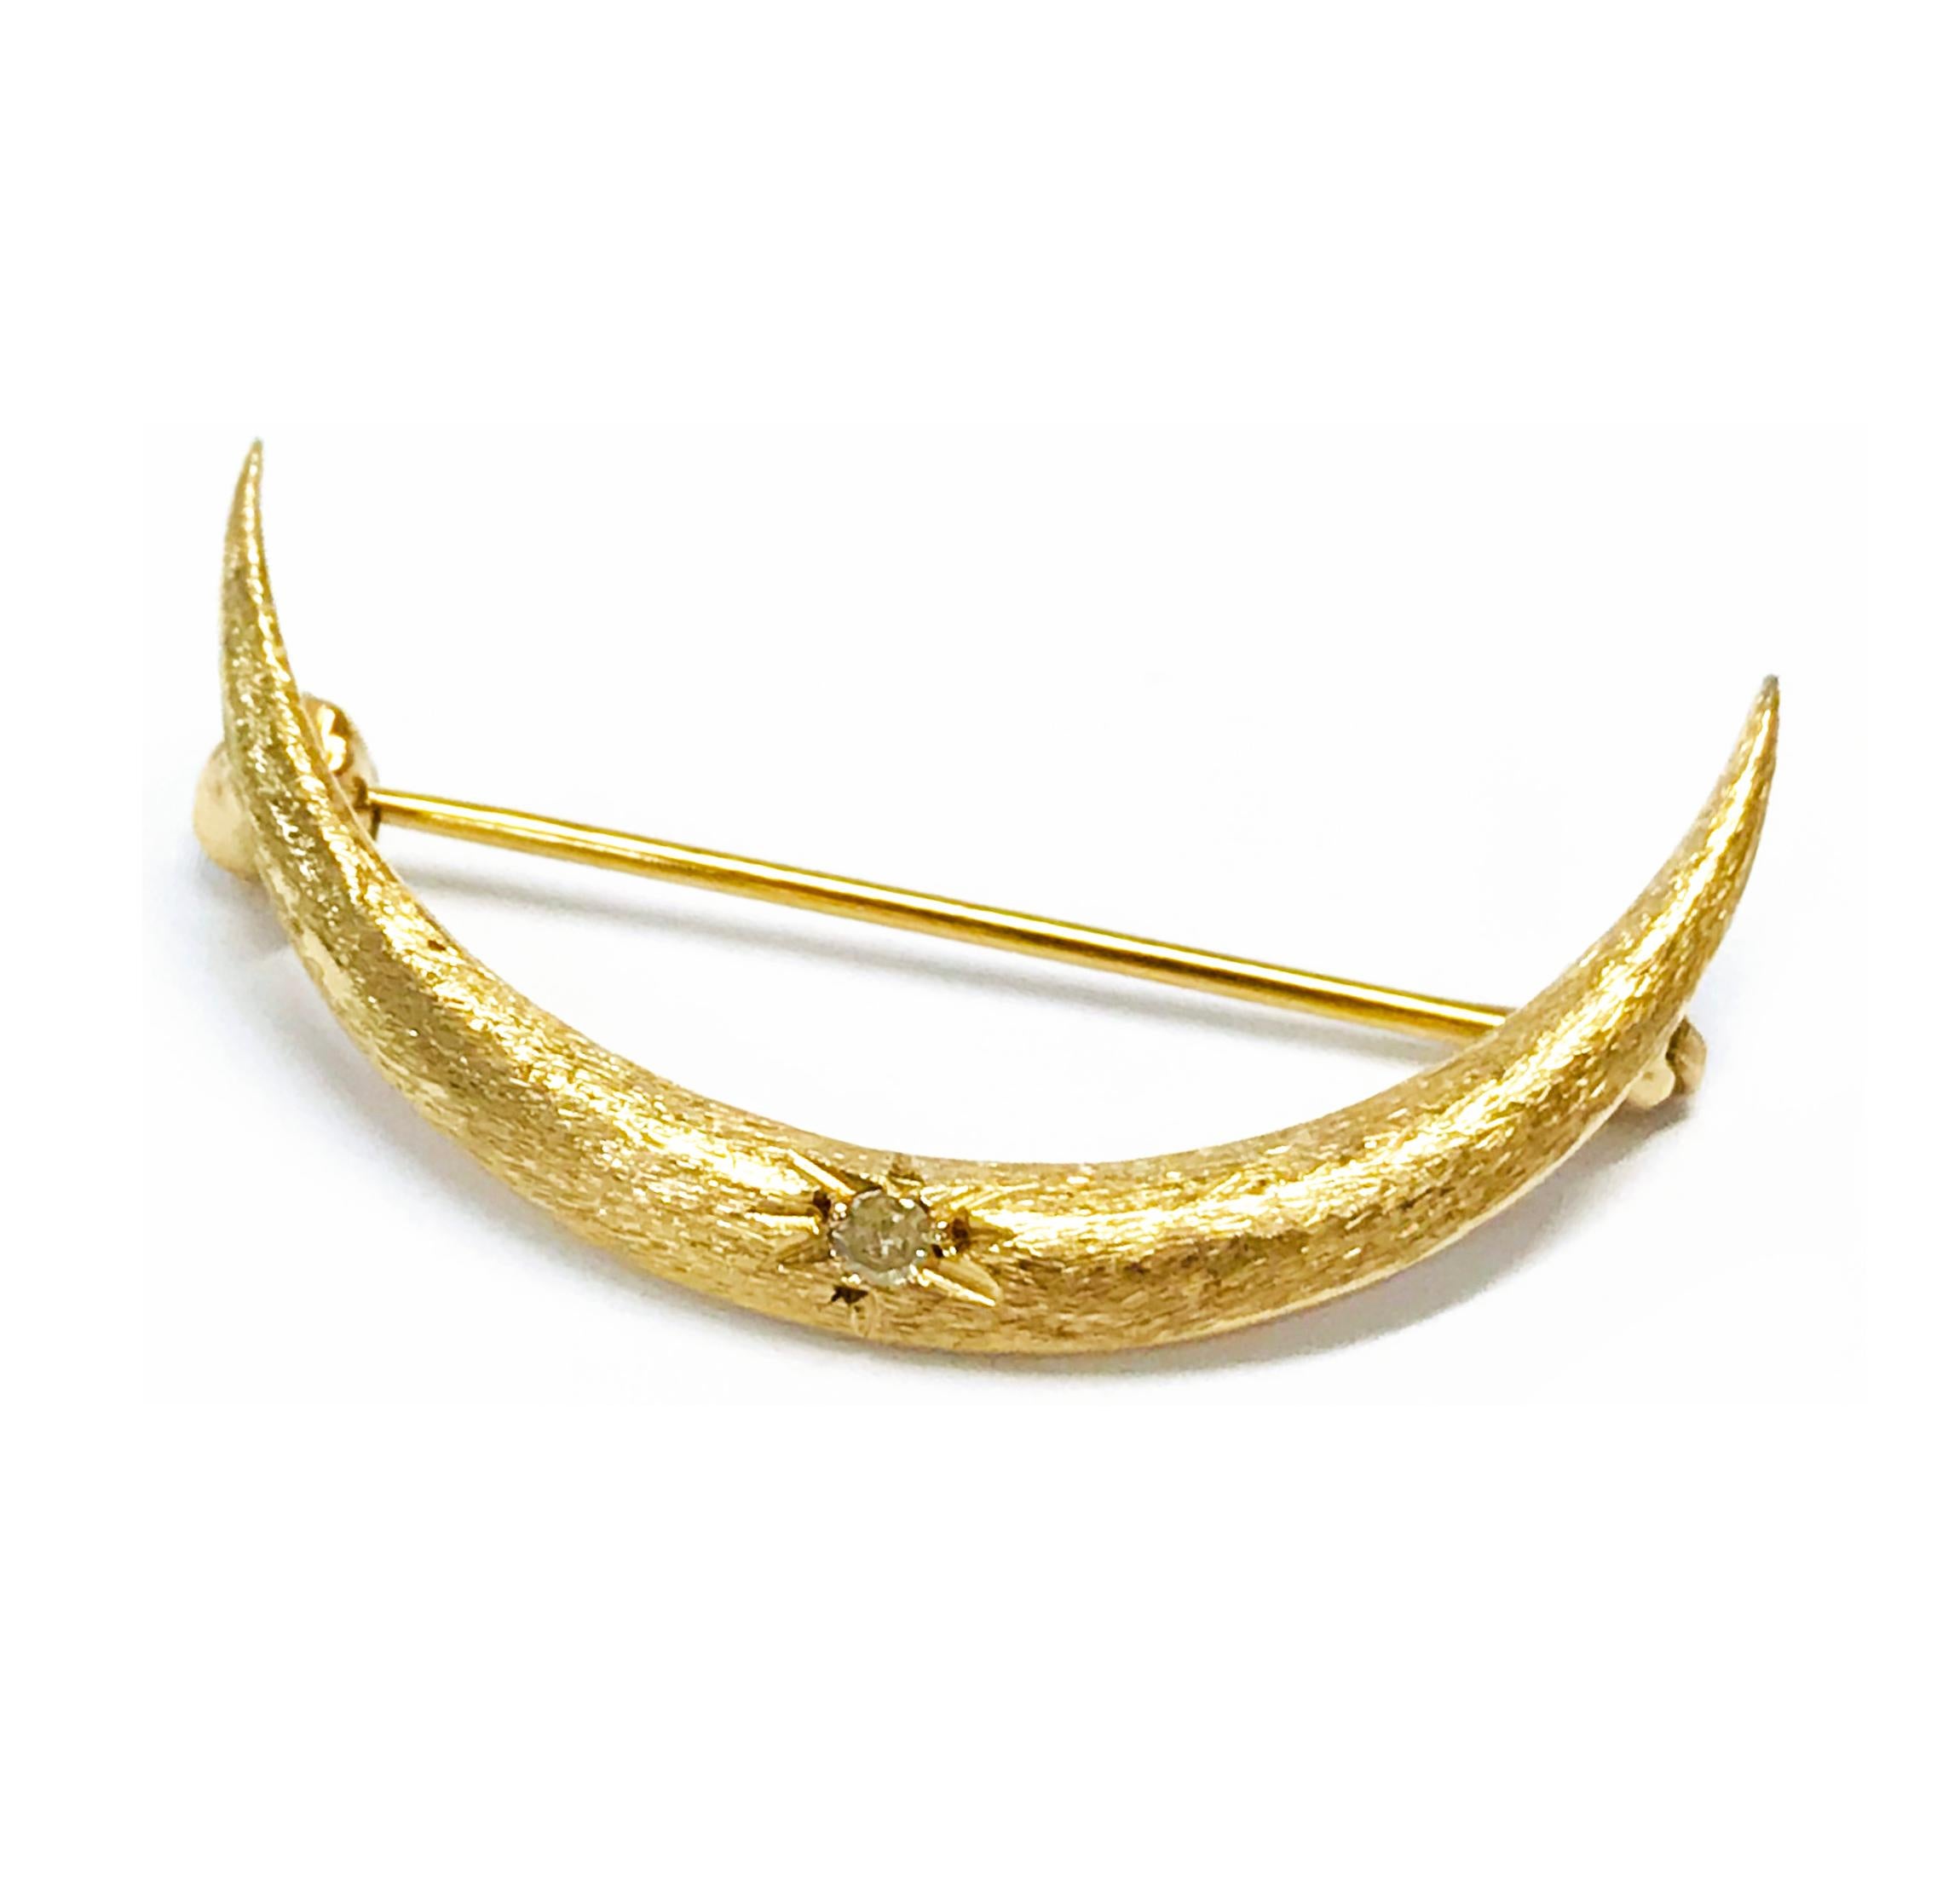 14 Karat Gold Diamond Crescent Moon Brooch/Pin. This is a simple and delicate yet sophisticated brooch/pin. The moon has an overall satin finish with a diamond set in the diamond-cut starburst center. The total diamond weight is 0.02ct. The